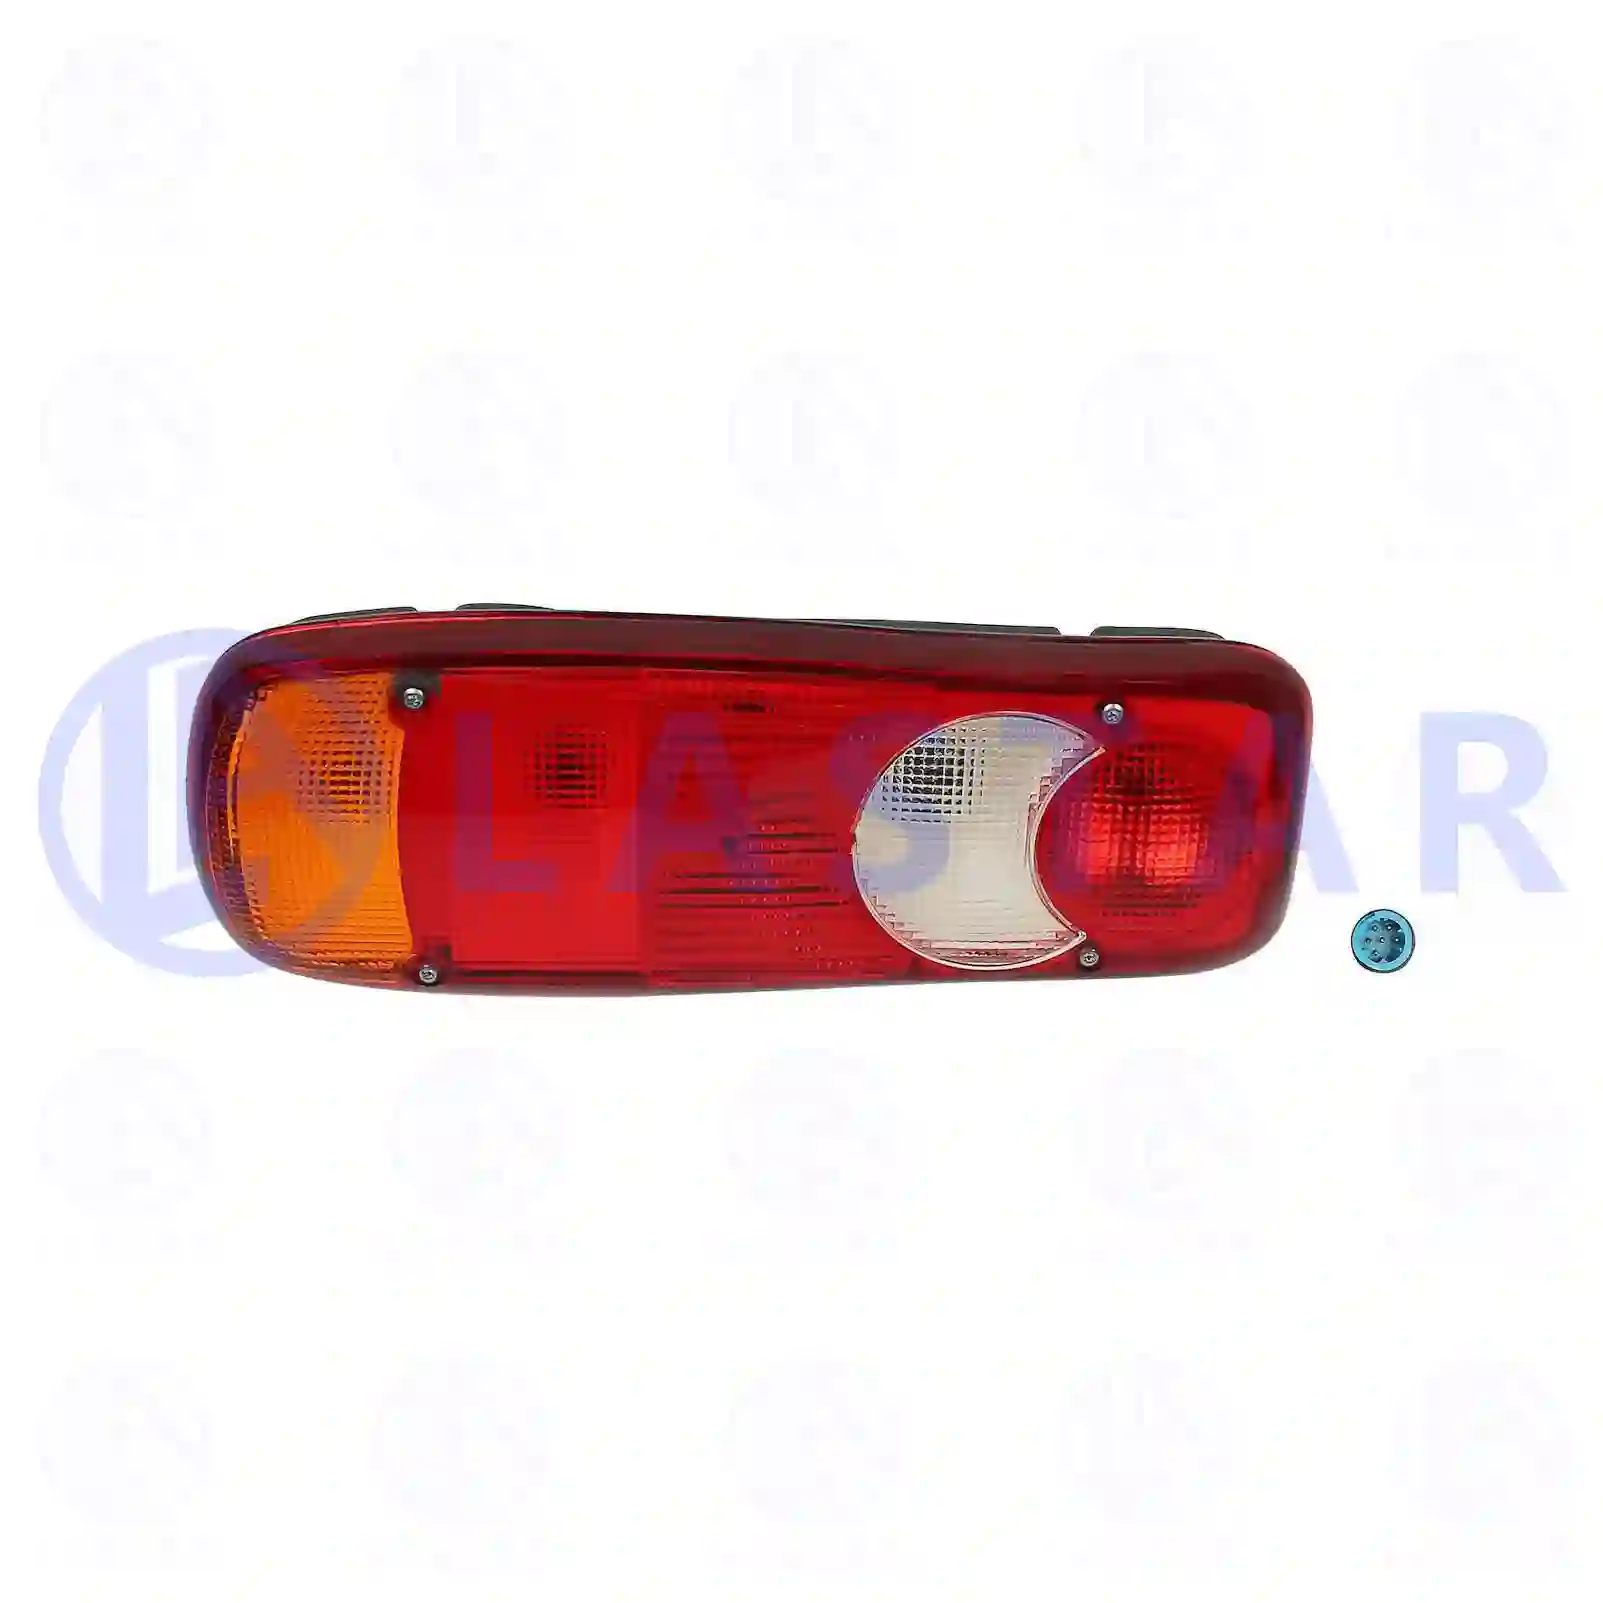 Tail lamp, without license plate lamp, 77711273, #YOK ||  77711273 Lastar Spare Part | Truck Spare Parts, Auotomotive Spare Parts Tail lamp, without license plate lamp, 77711273, #YOK ||  77711273 Lastar Spare Part | Truck Spare Parts, Auotomotive Spare Parts